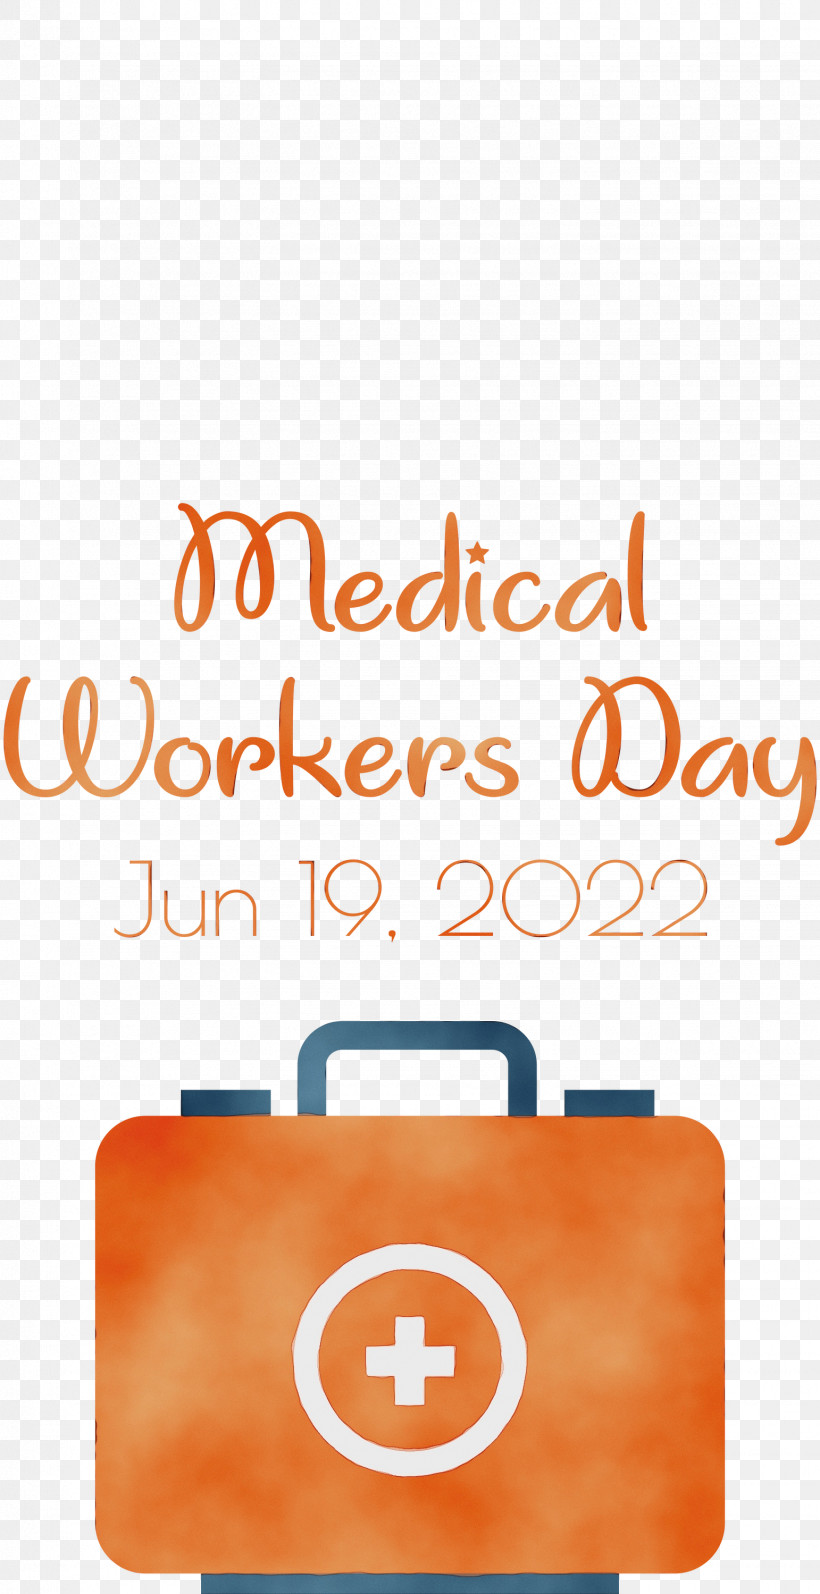 Line Font Meter Geometry Mathematics, PNG, 1542x2999px, Medical Workers Day, Geometry, Line, Mathematics, Meter Download Free